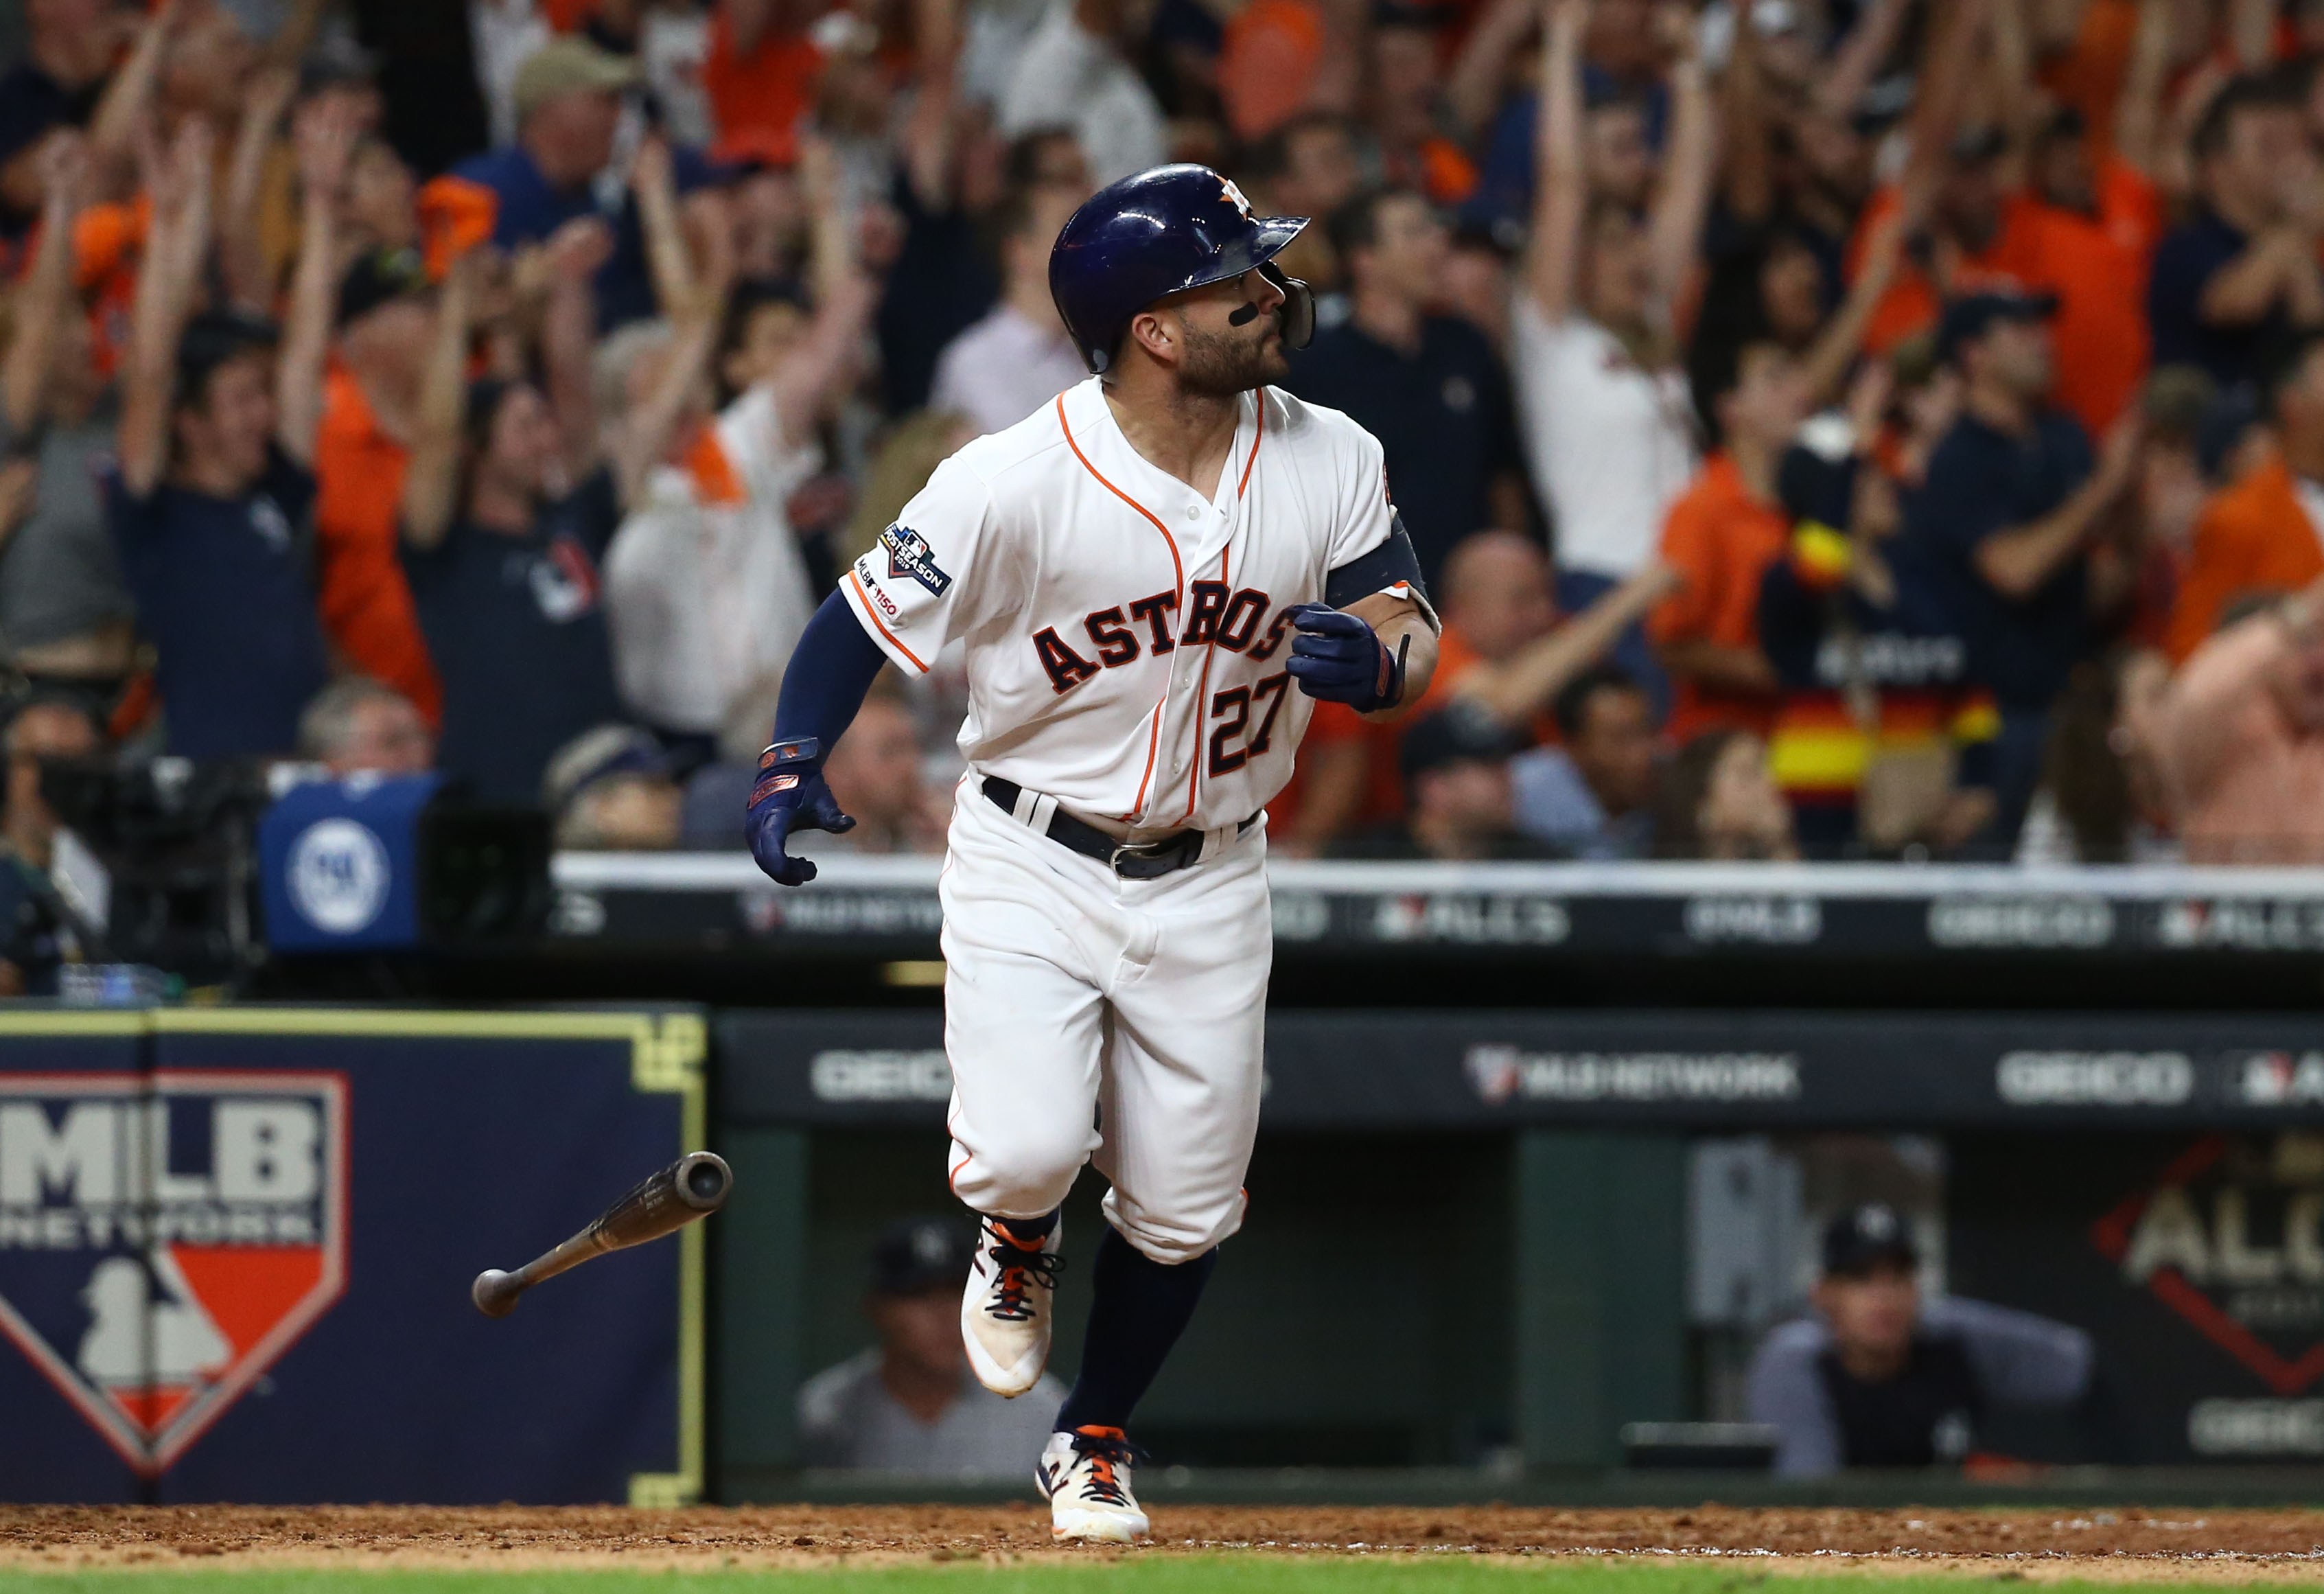 A Jose Altuve walkoff home run sends Astros back to World Series The